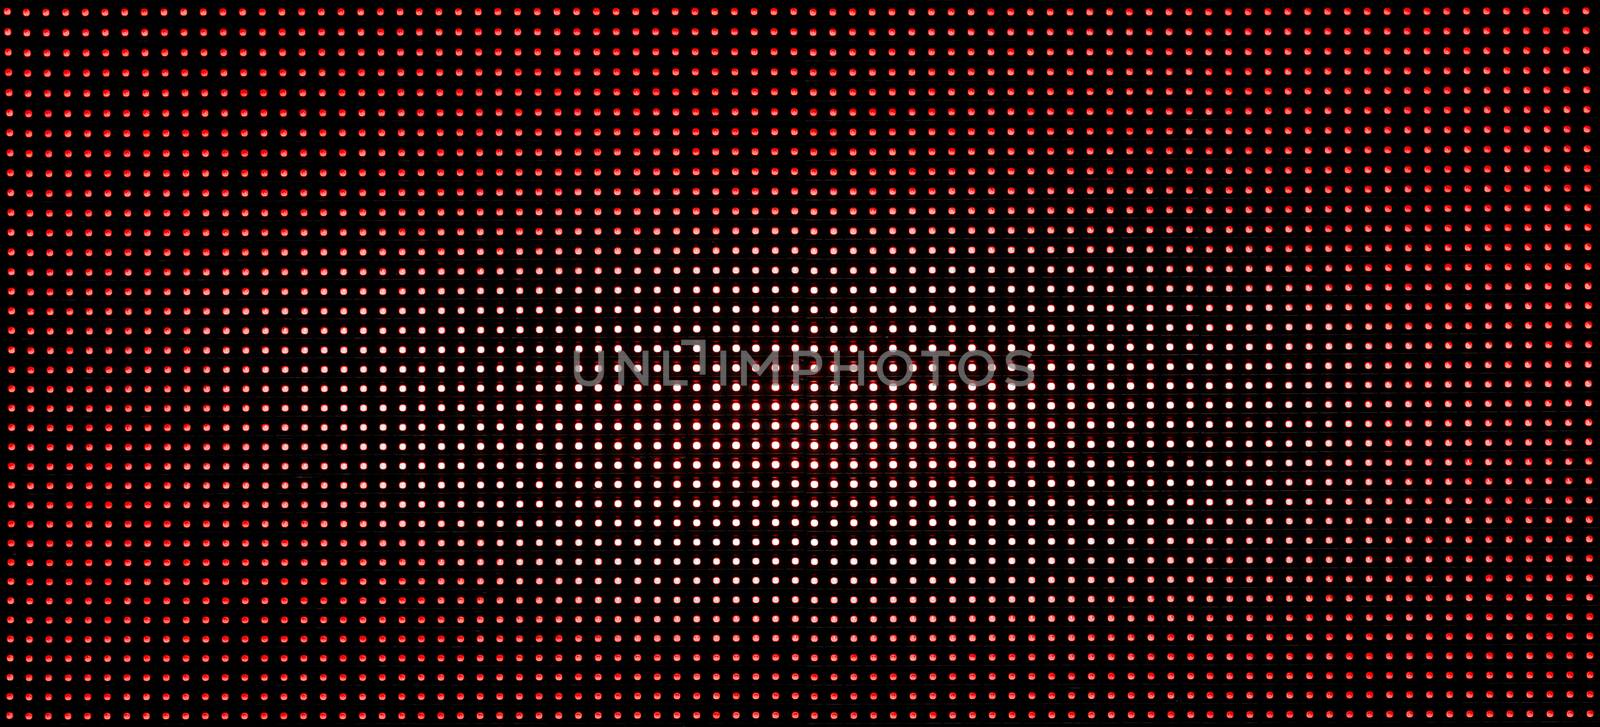 background pattern luminous red and white led dots lights by Gera8th